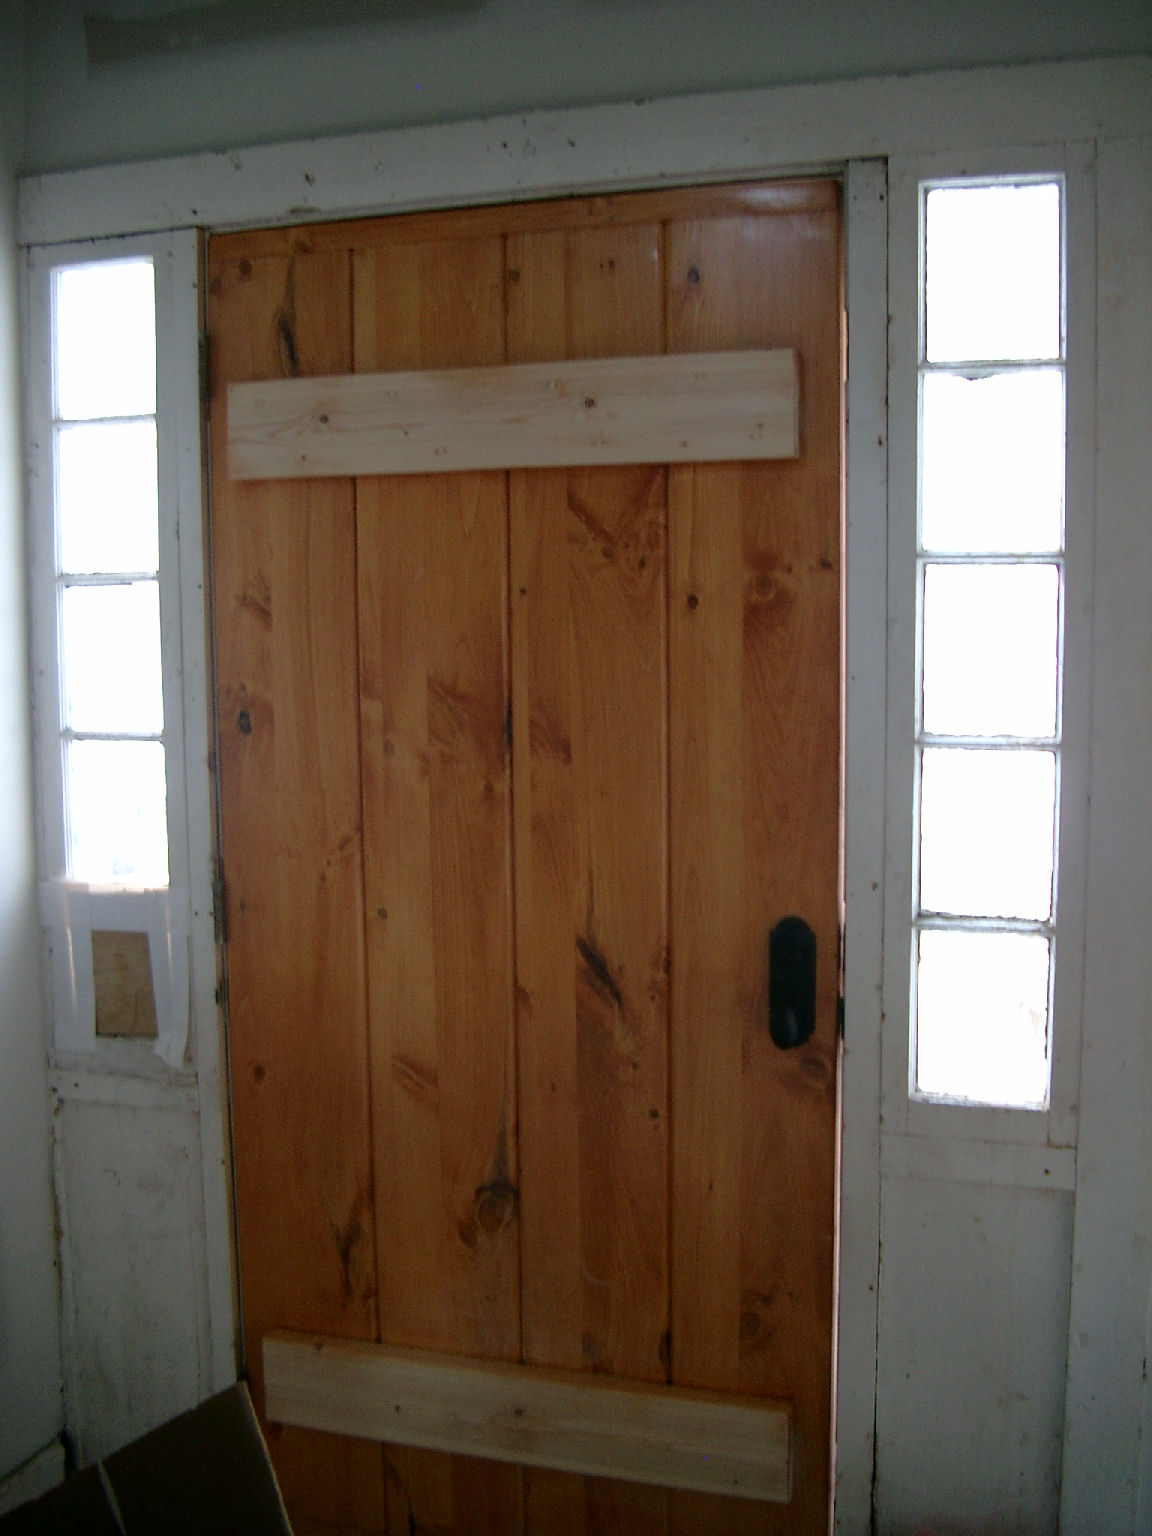 a wooden door with some windows and a lamp on